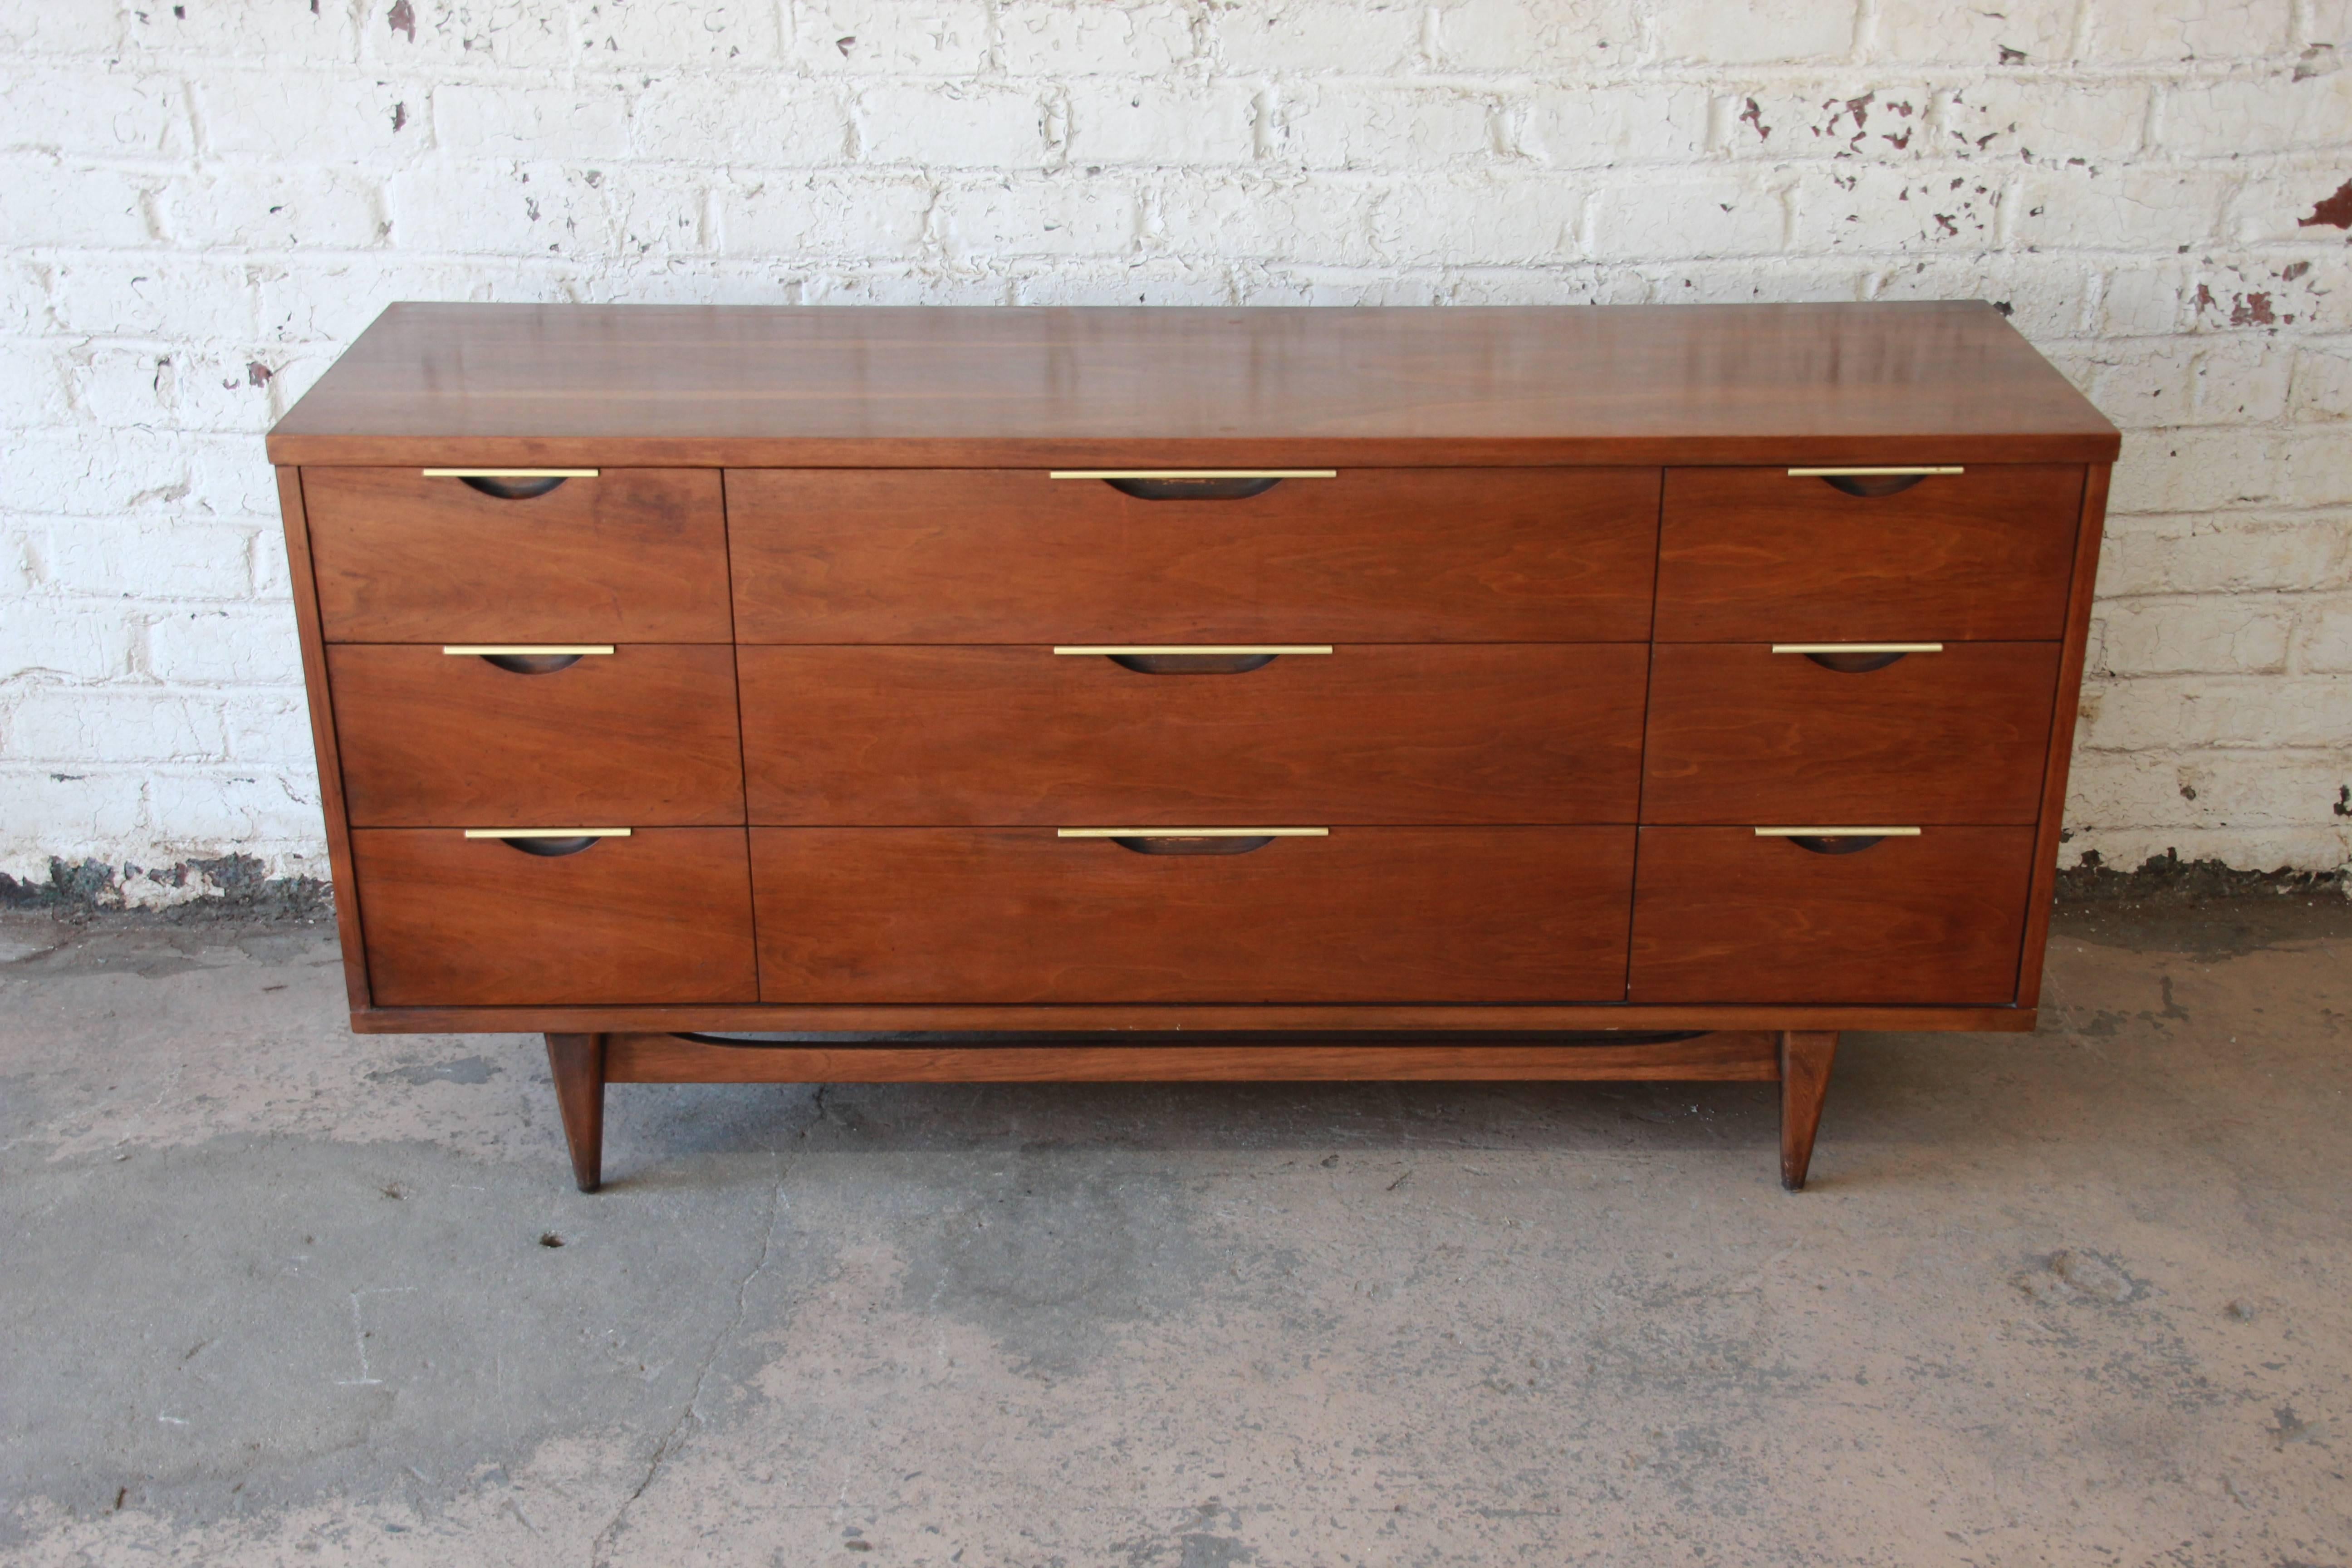 A very nice Mid-Century Modern walnut long dresser or credenza from 